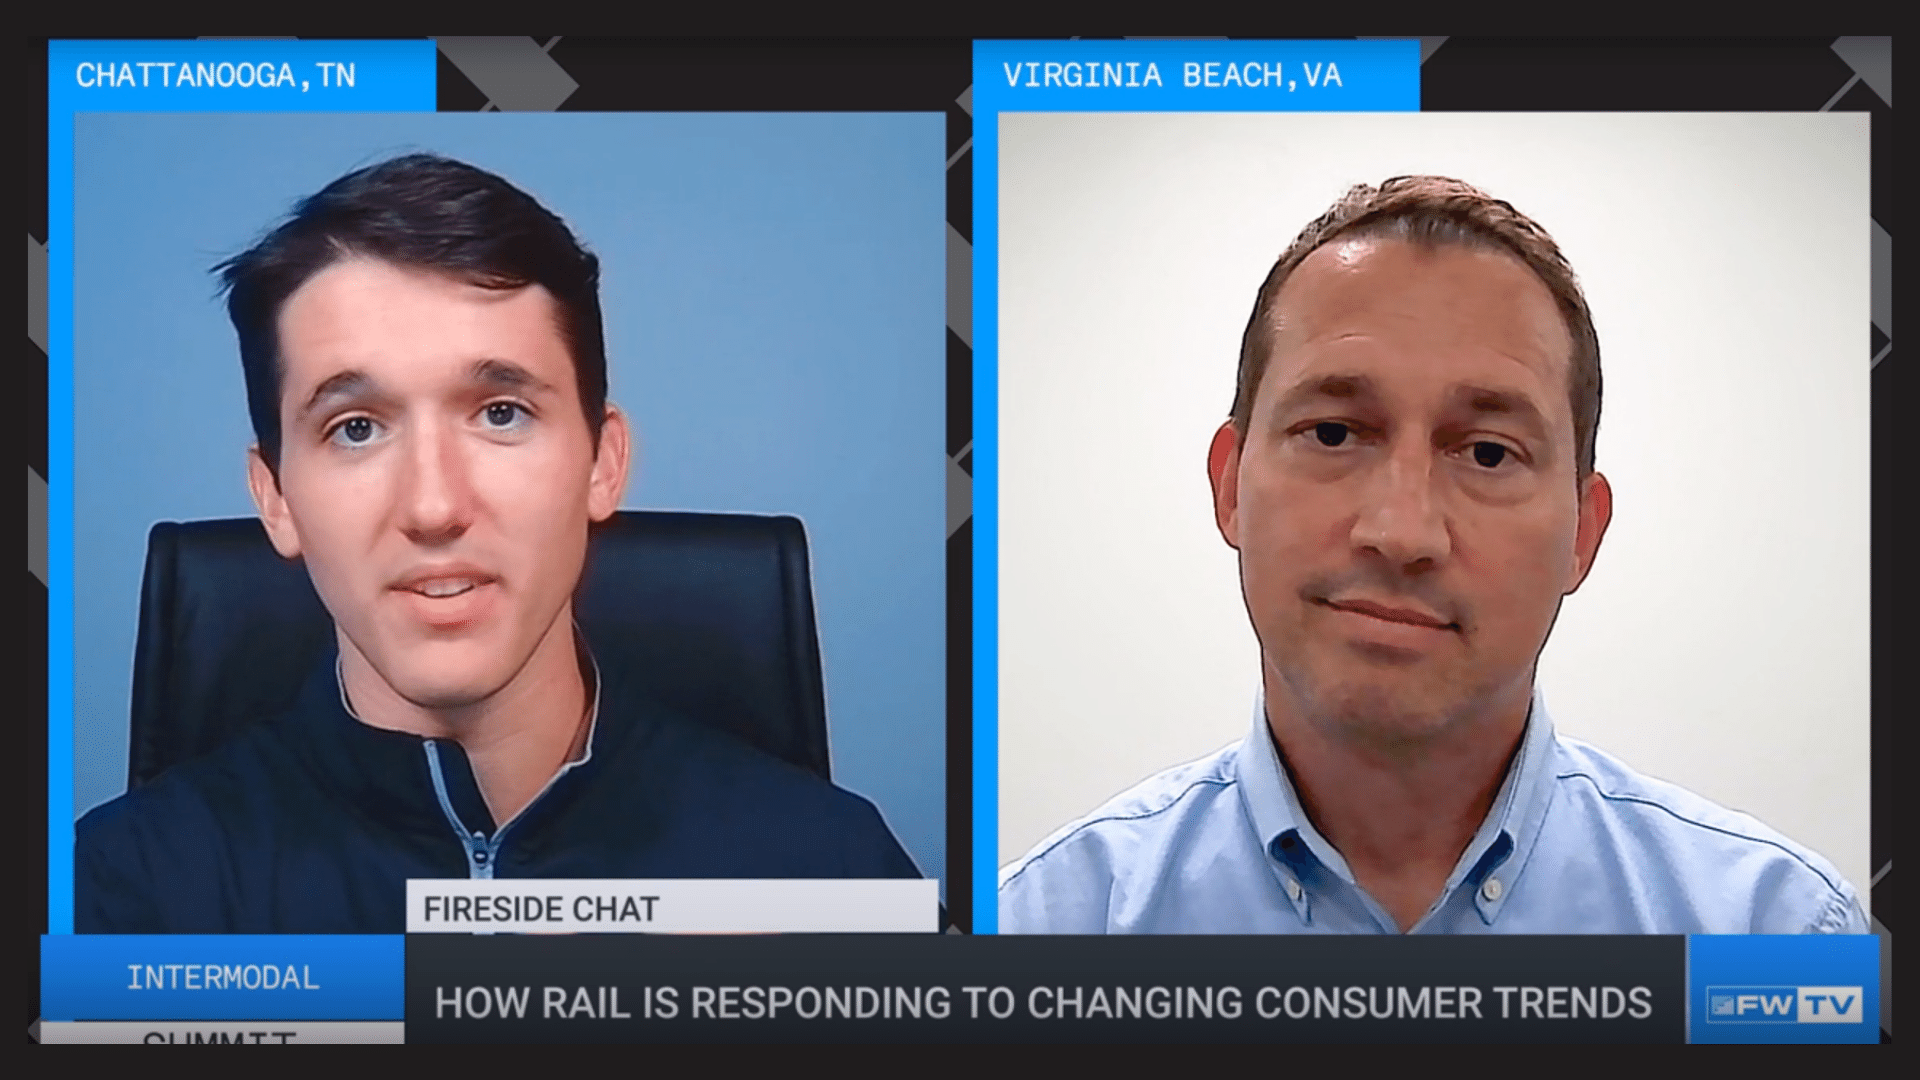 Panels - Fireside Chat on how rail is responding to changing consumer trends